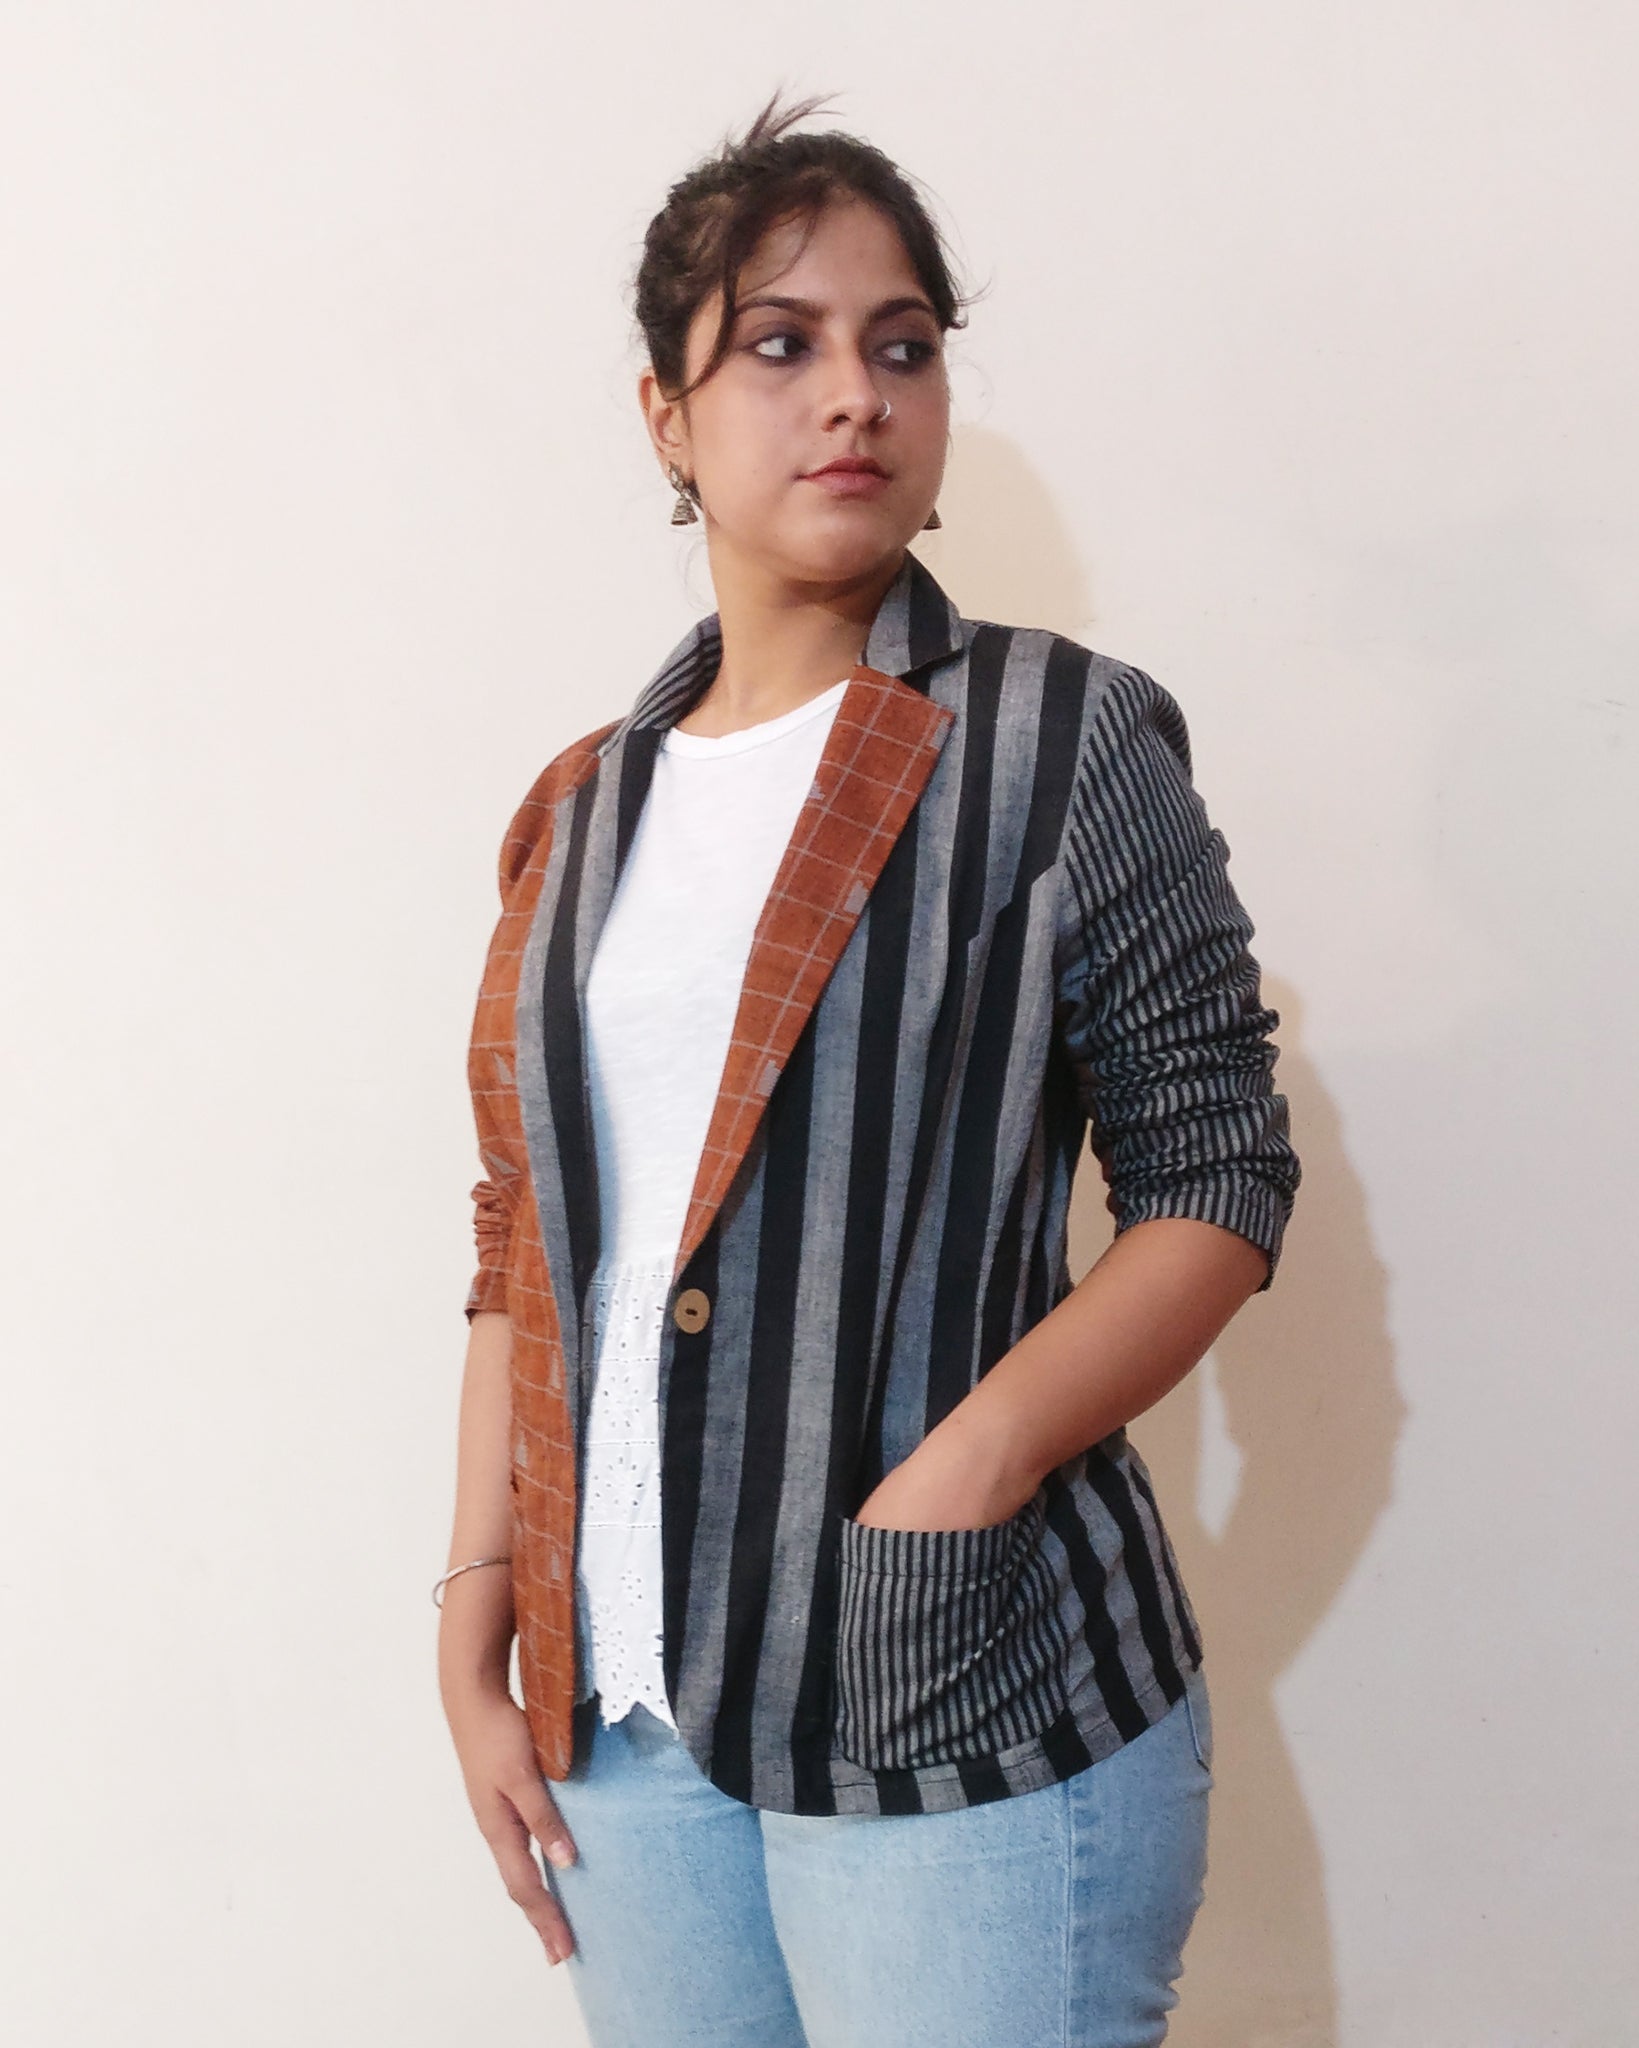 This blazer is made of single fabric which has 3 patterns - orange, black and grey wide stripe, black and grey narrow stripe. Each piece has different face depending on the position of each pattern. Cool cotton thin blazer jacket from women's base body pattern. Buy online!  (profile image)